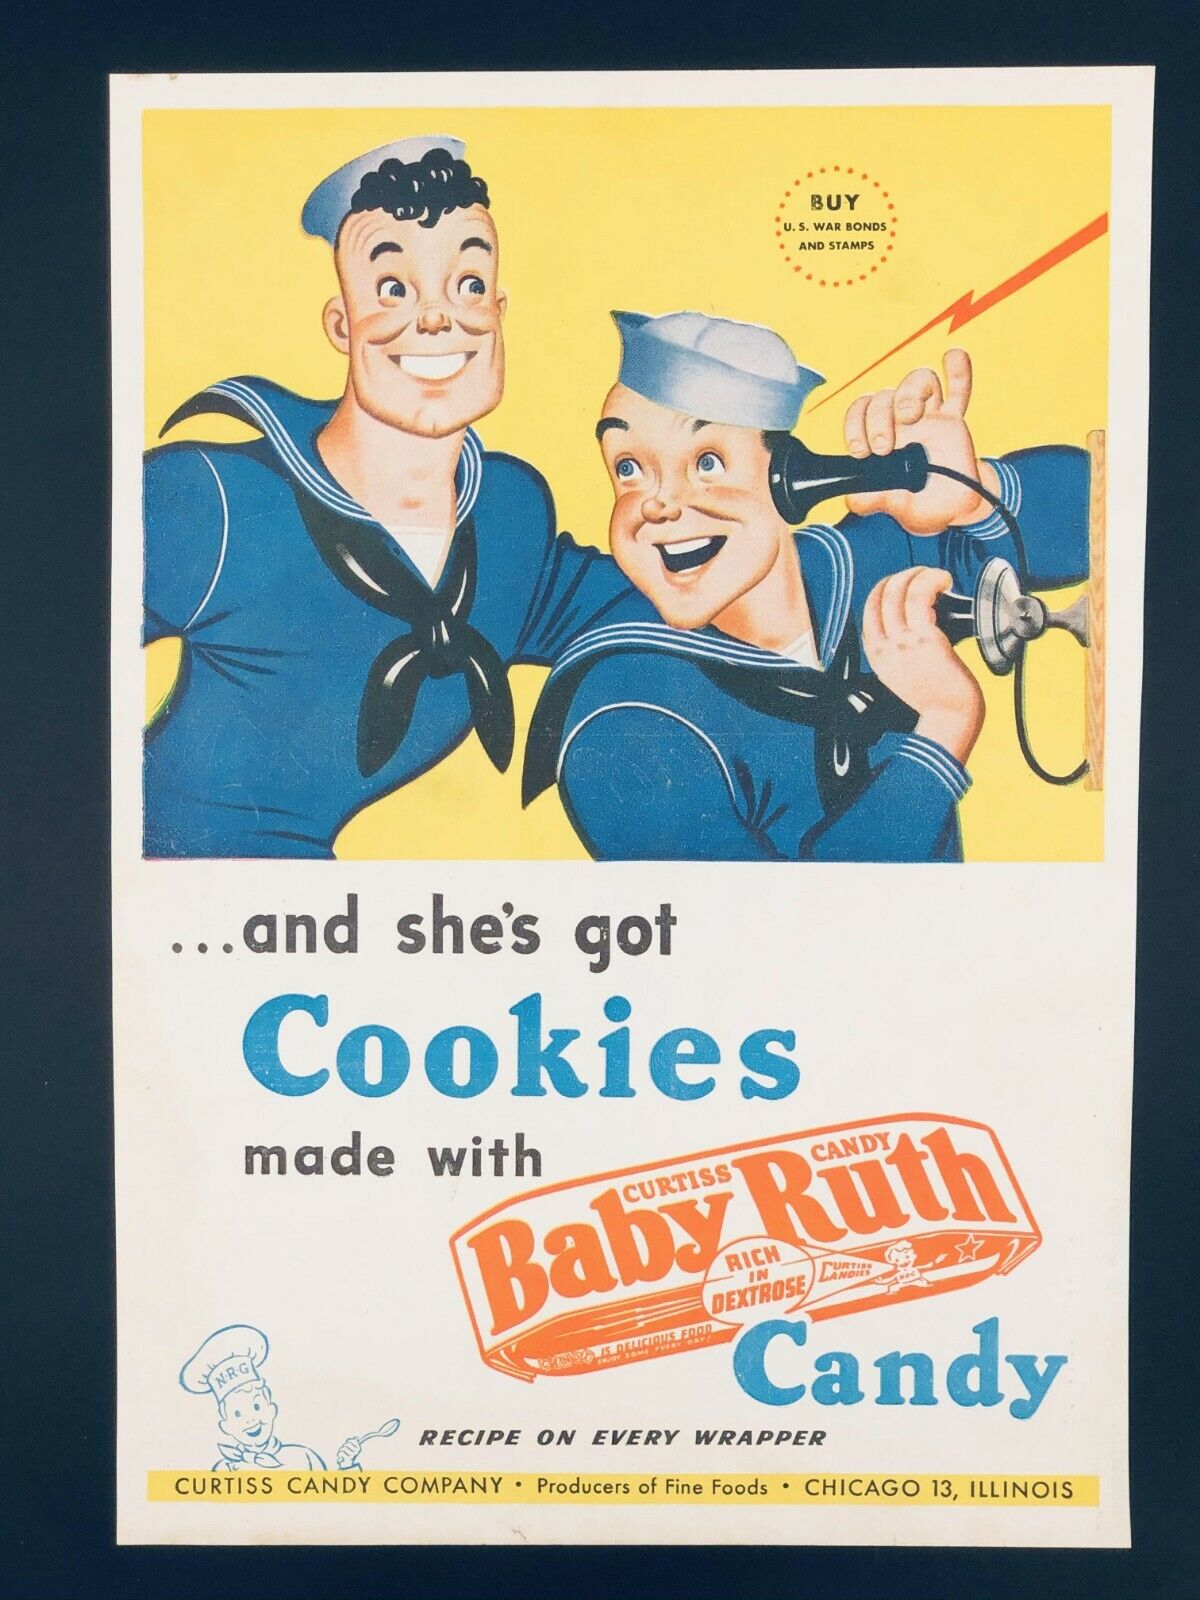 Original Baby Ruth Ad: Curtiss Candy Co, Wrapper Recipe, Cookies, Servicemen 